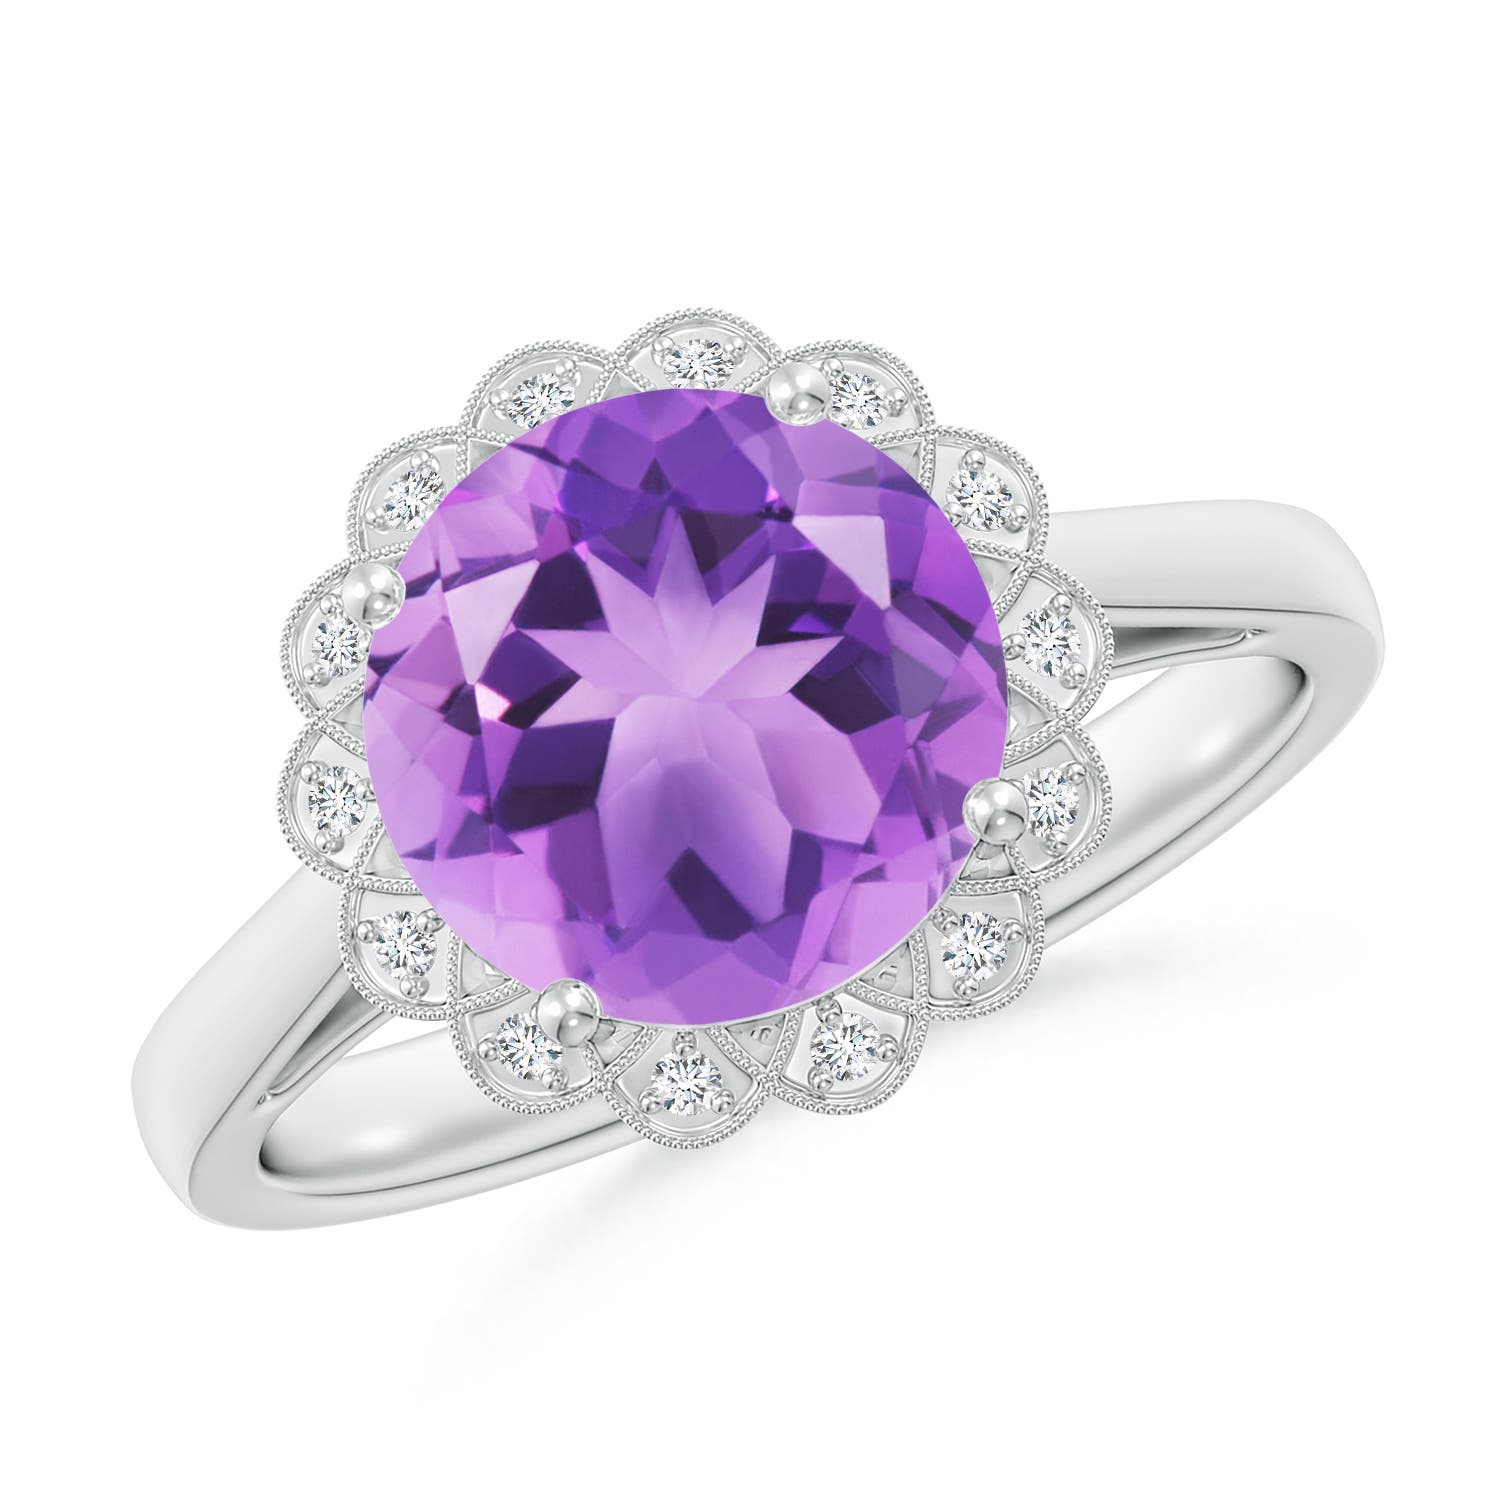 A - Amethyst / 2.52 CT / 14 KT White Gold